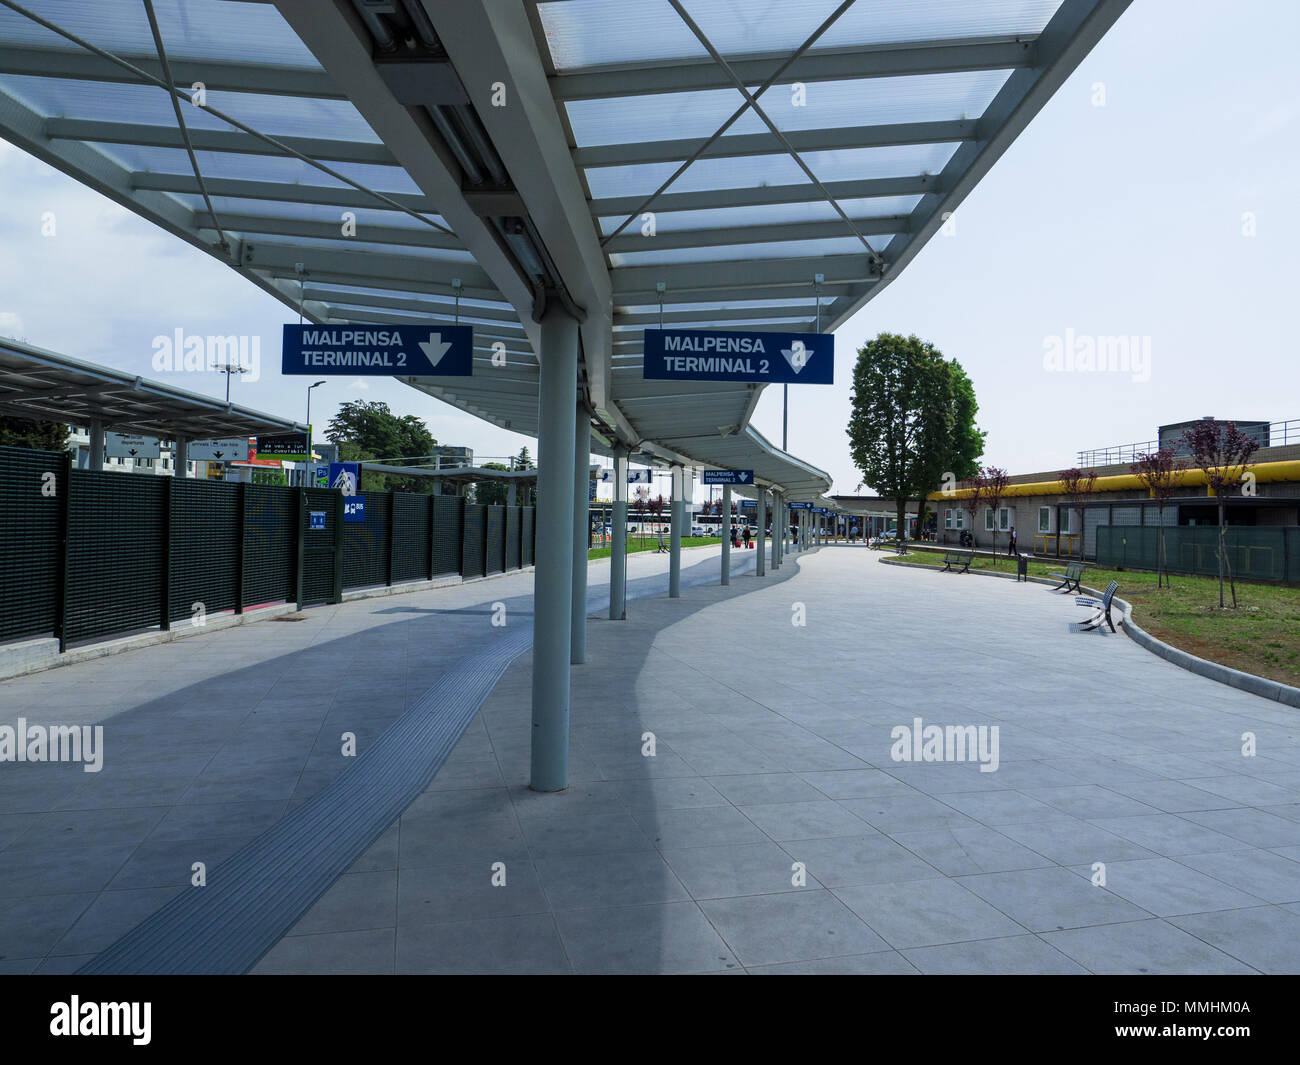 futuristic roof leads to the two terminals of Malpensa airport. Milan, Italy Stock Photo